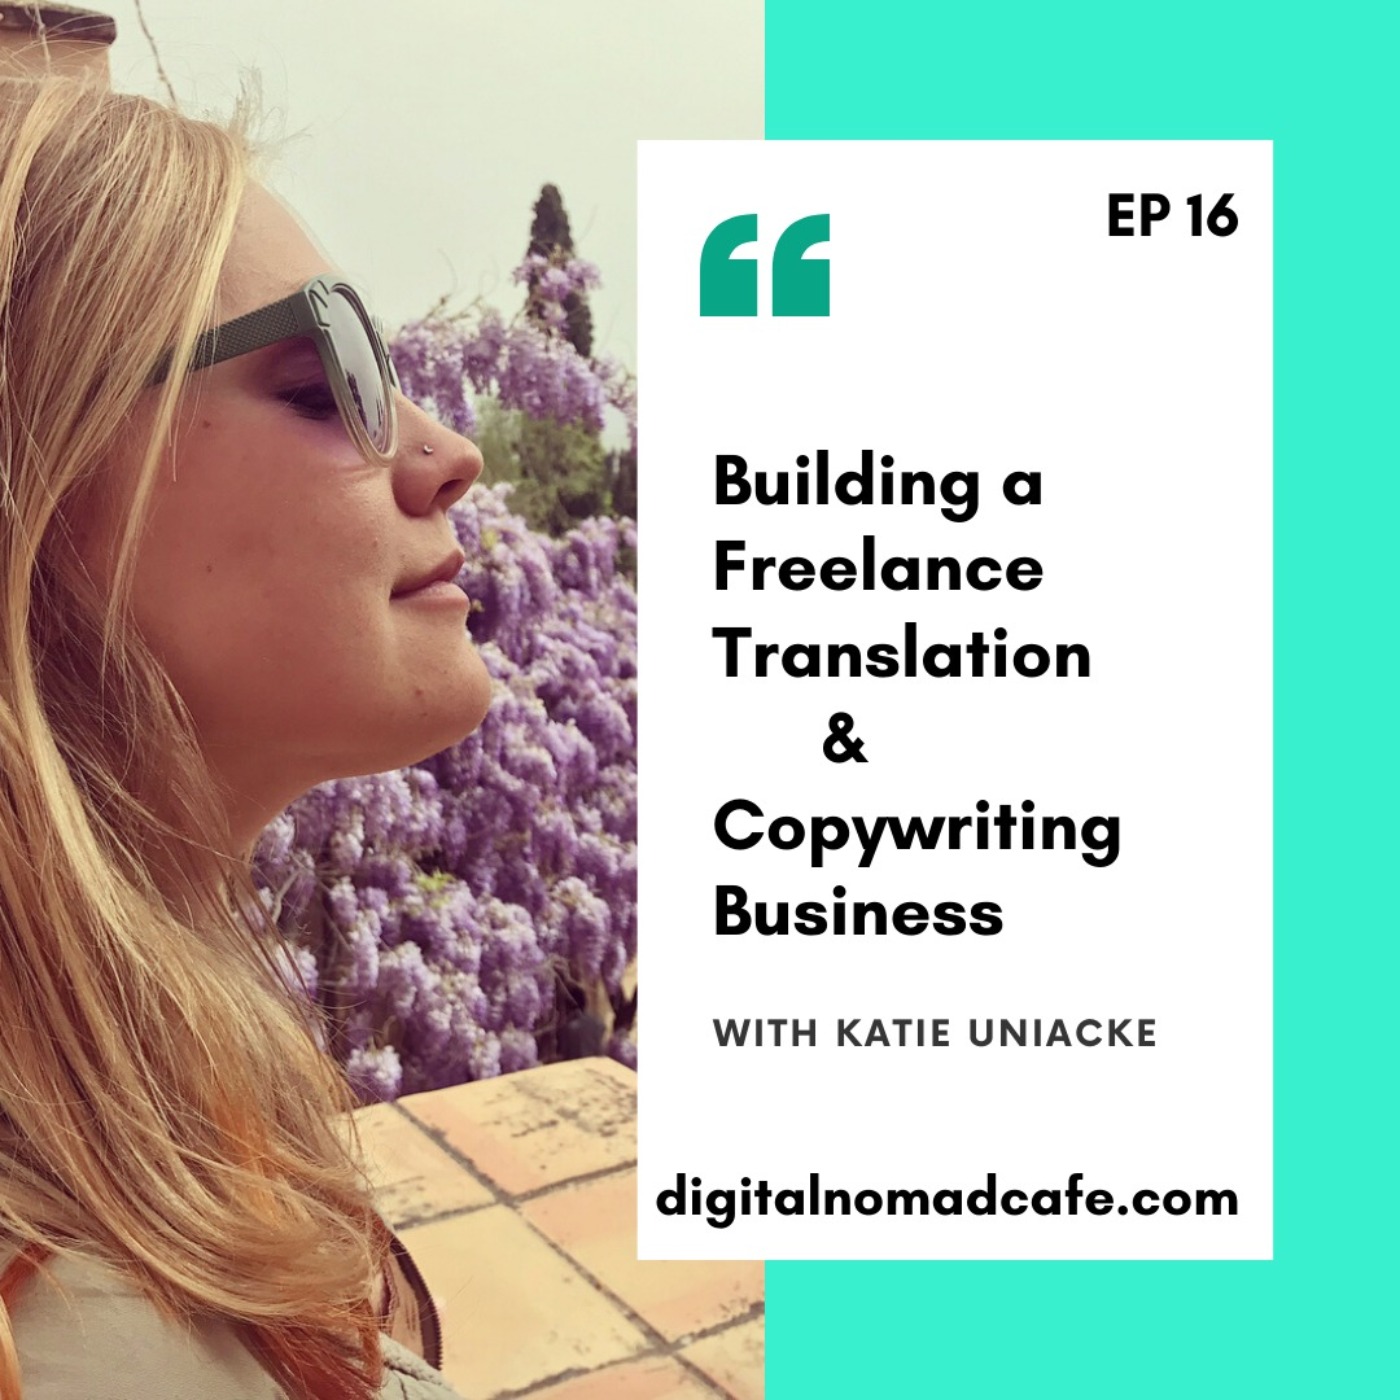 EP16: Building a freelance translation & copywriting business with Katie from KatieUniacke.com